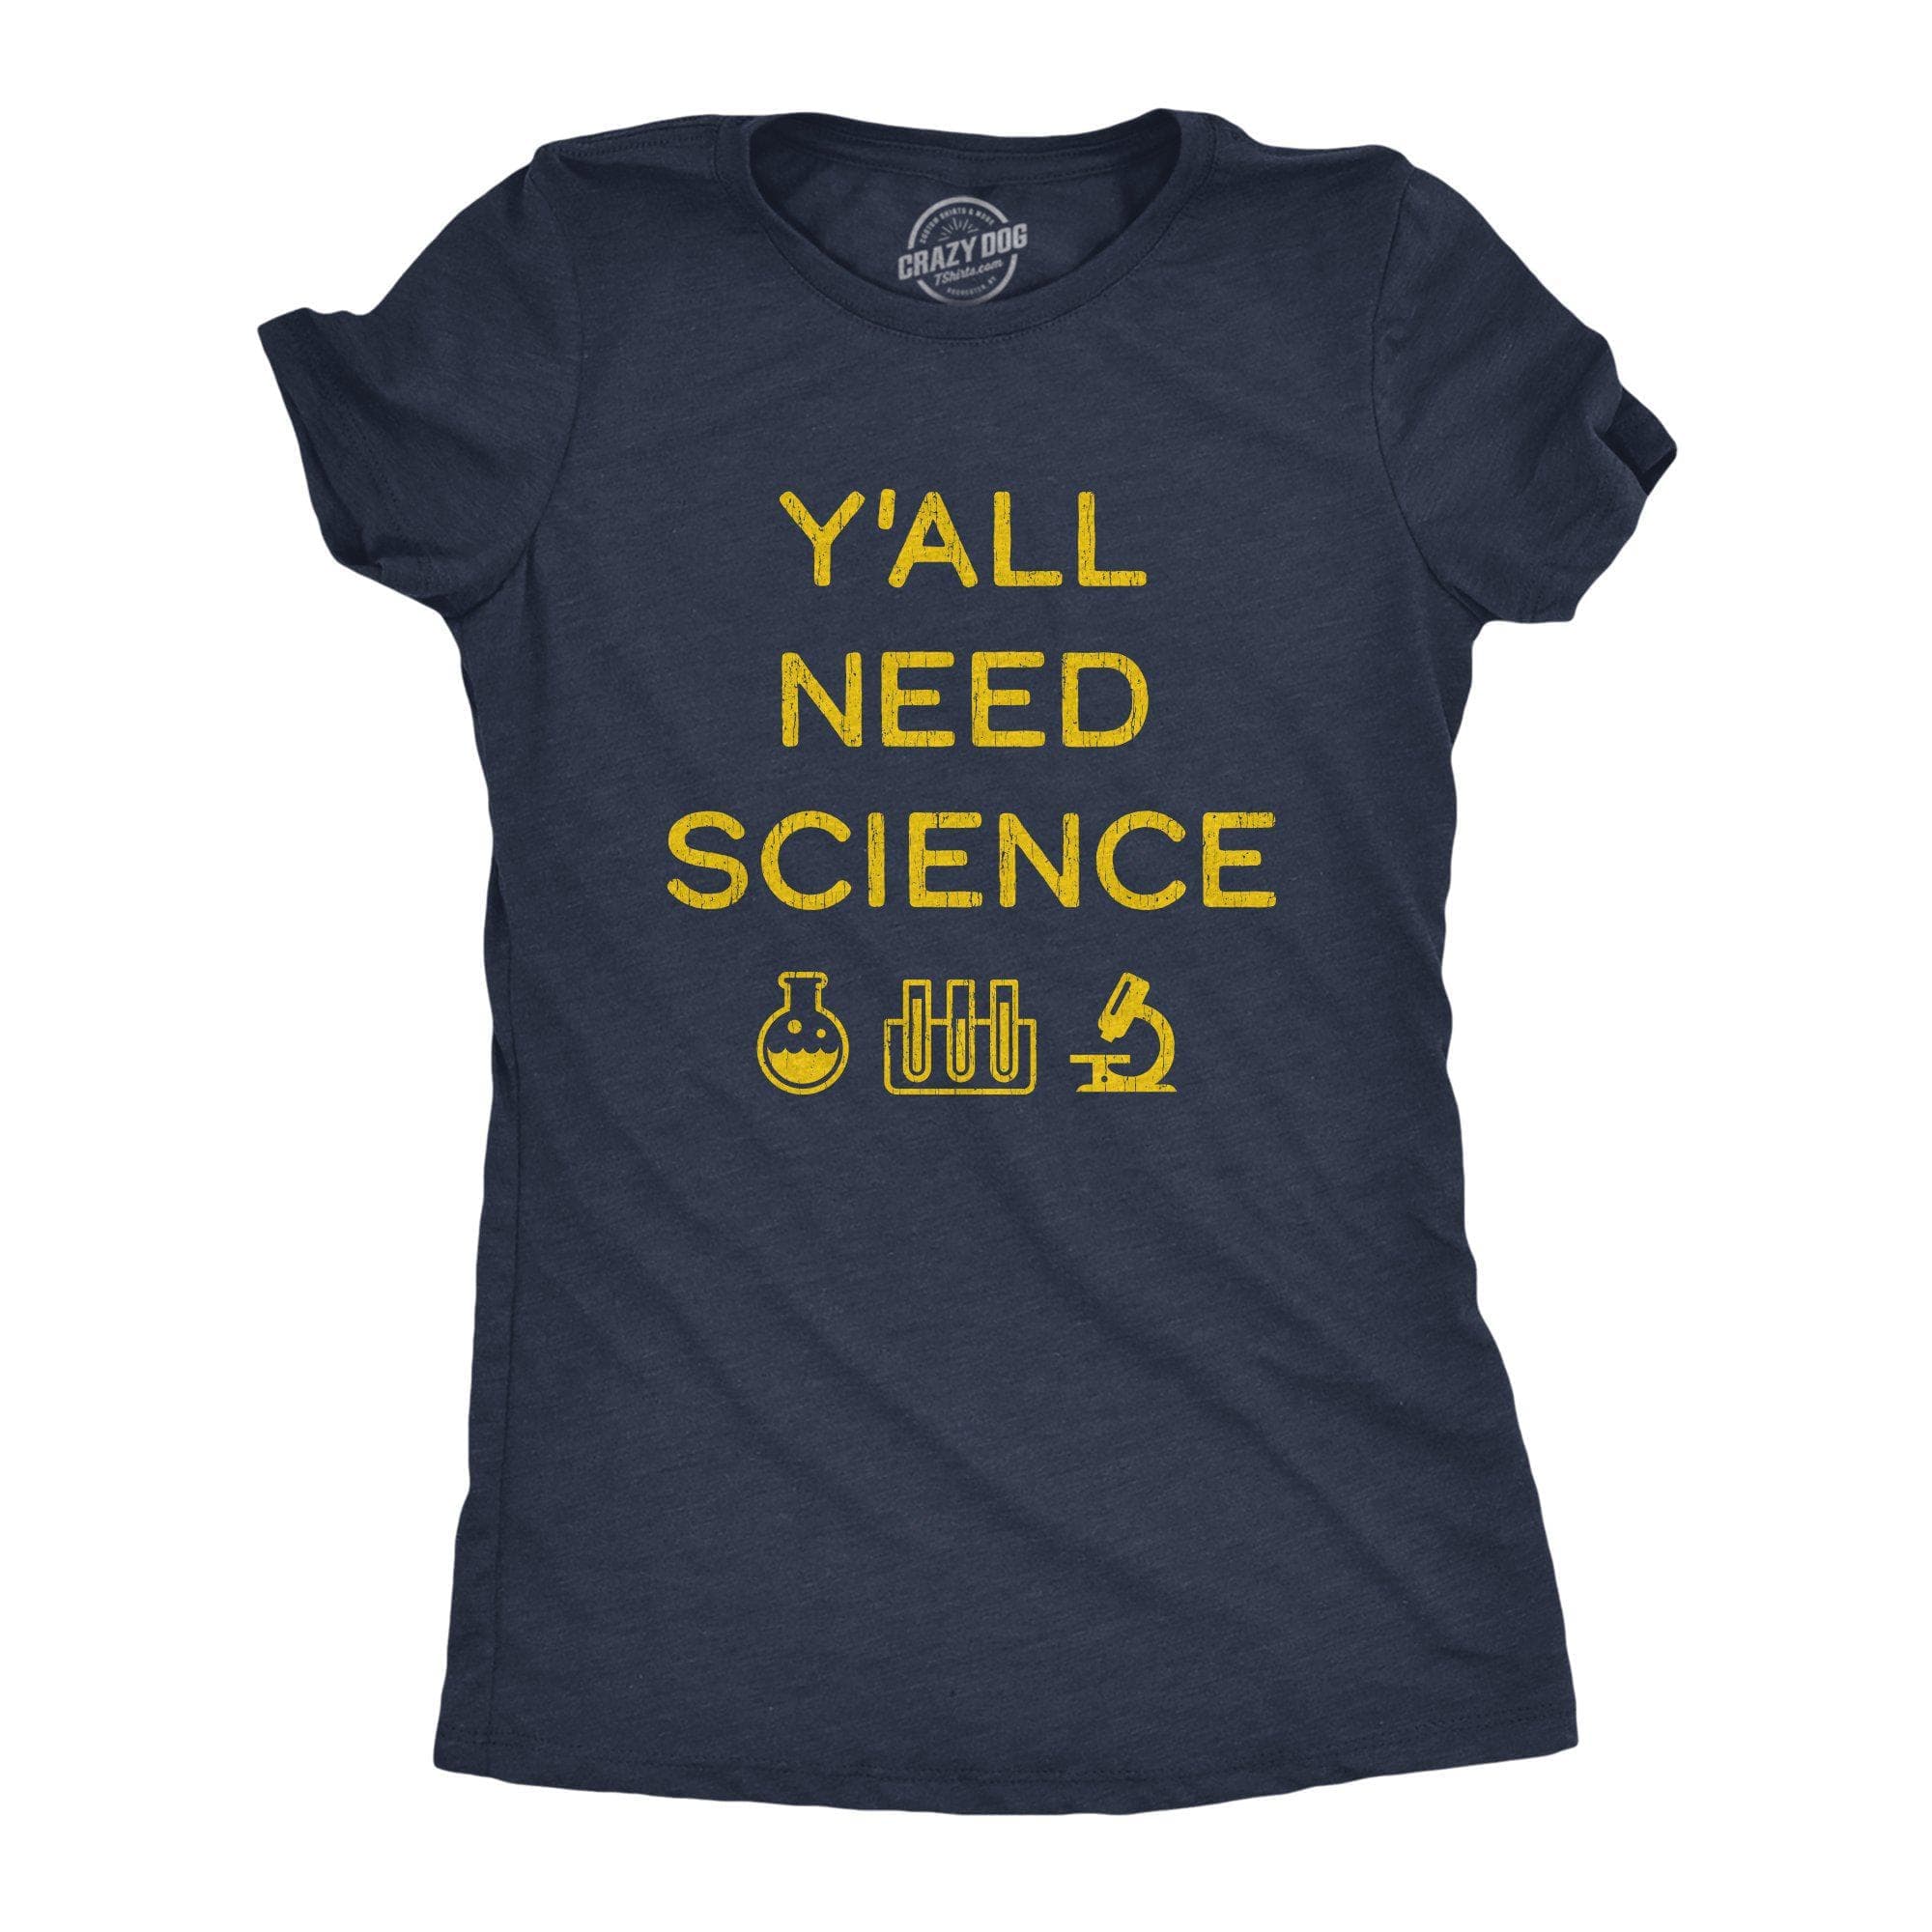 Y'all Need Science Women's Tshirt - Crazy Dog T-Shirts